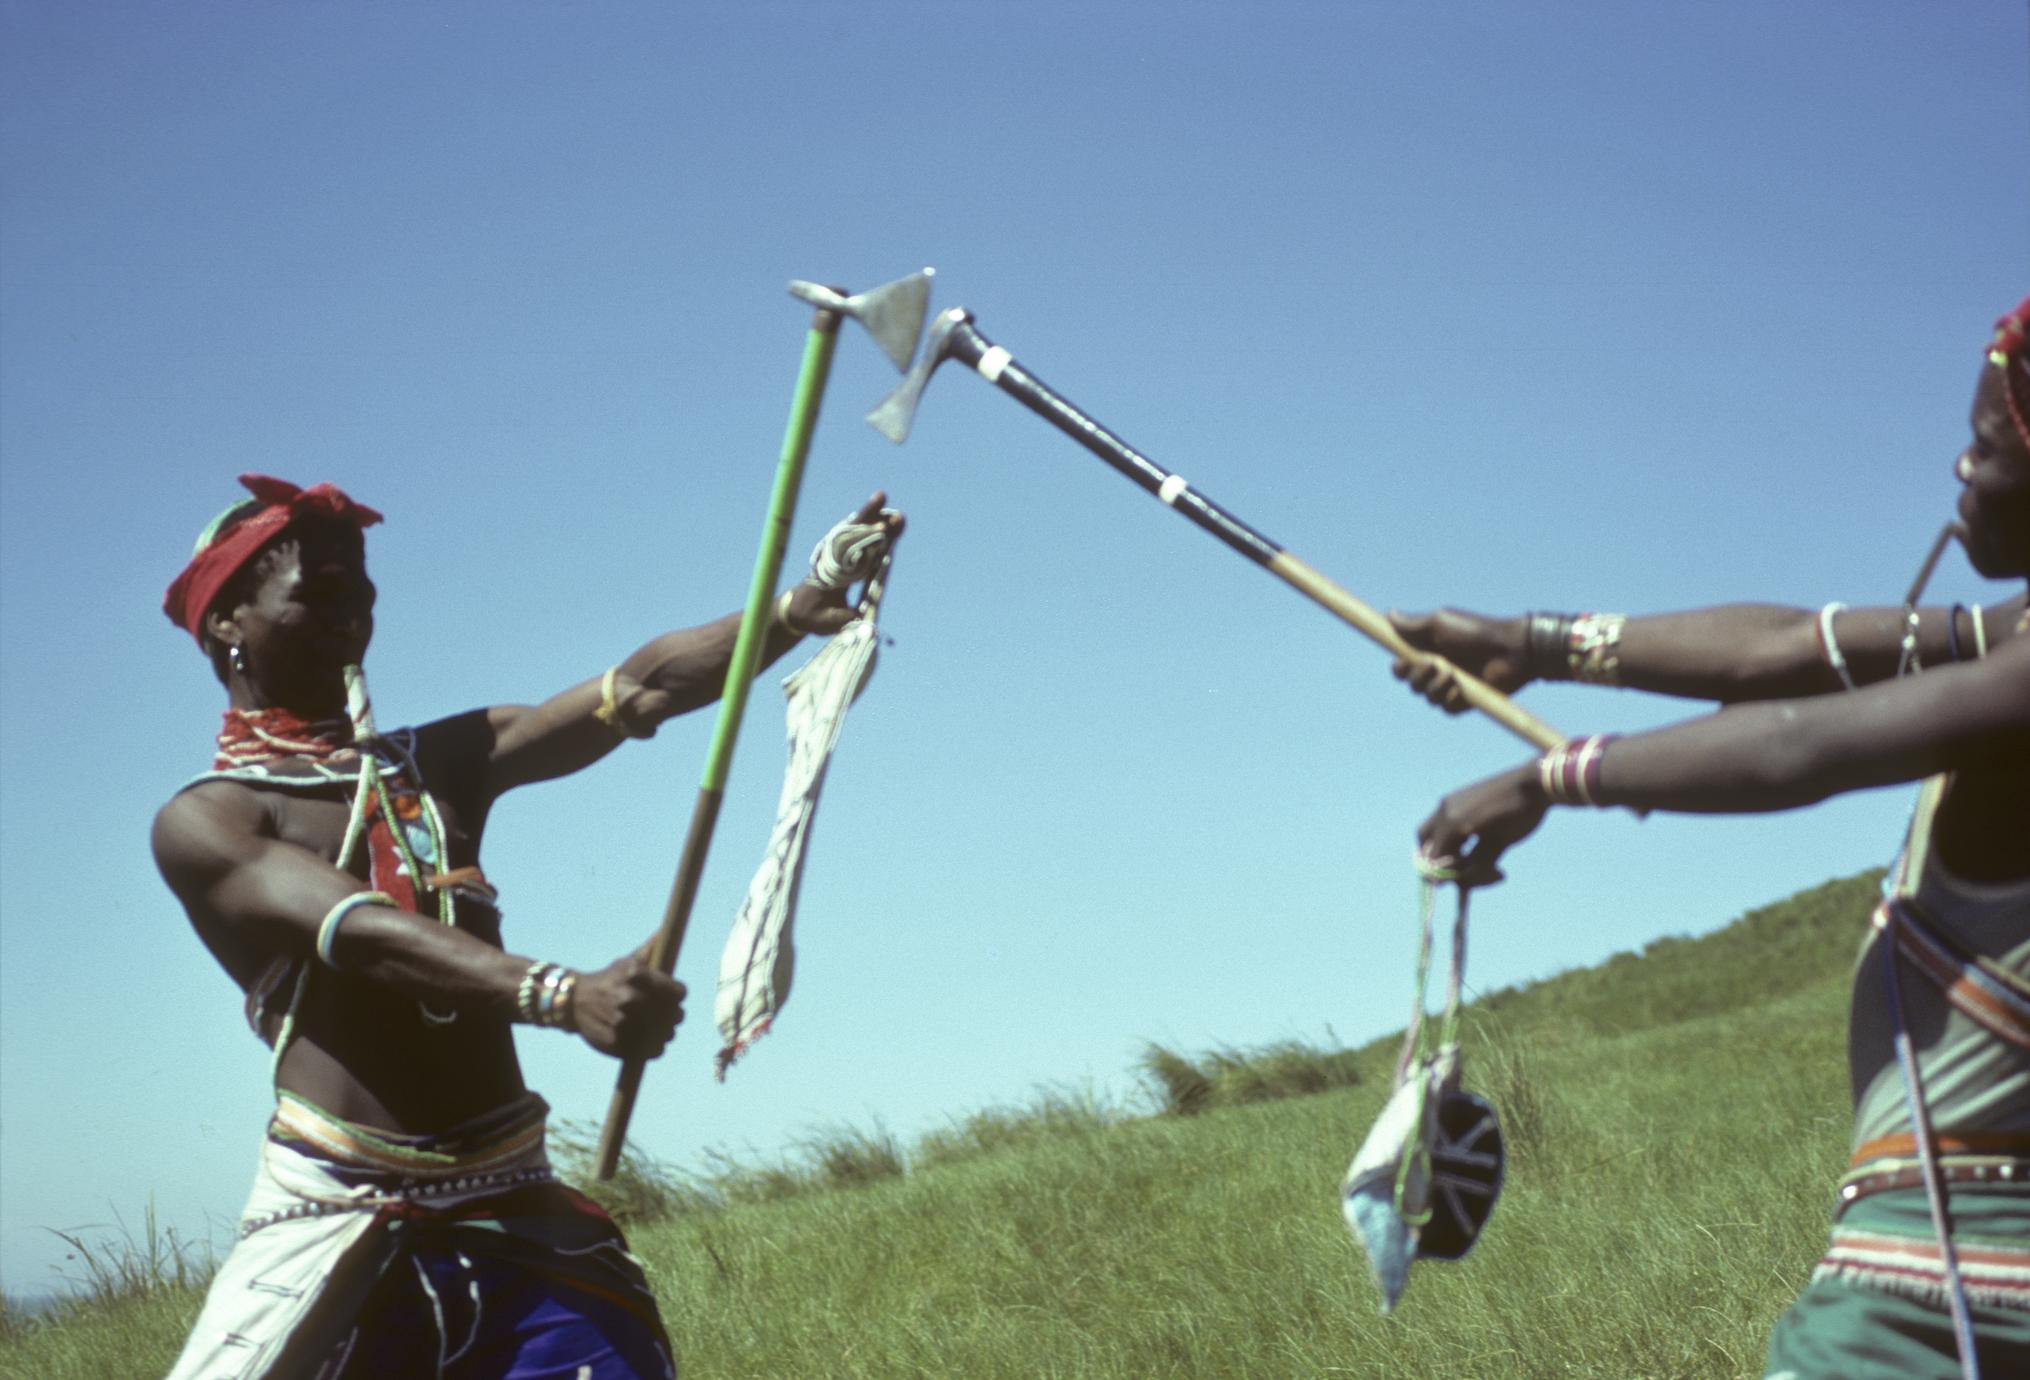 South Africa's ancient art of stick fighting